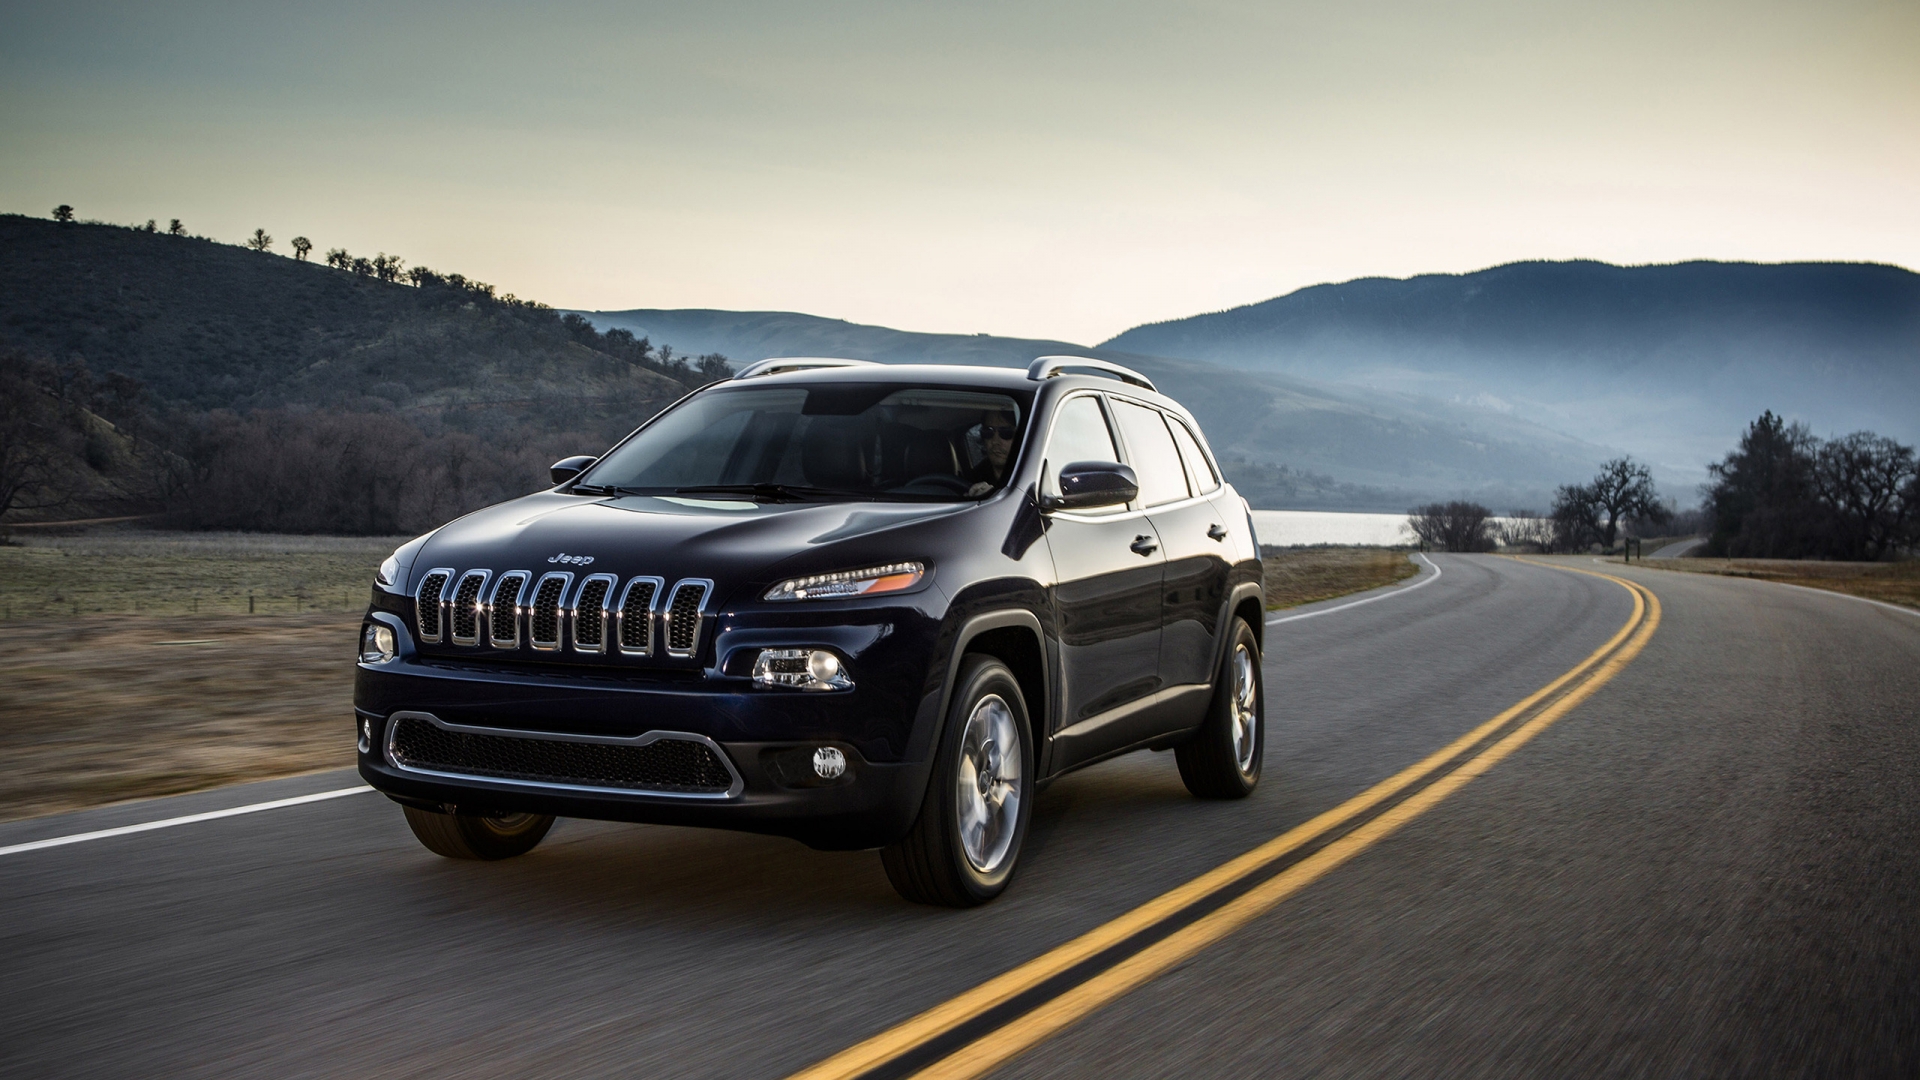 Jeep Cherokee 2014 Edition for 1920 x 1080 HDTV 1080p resolution